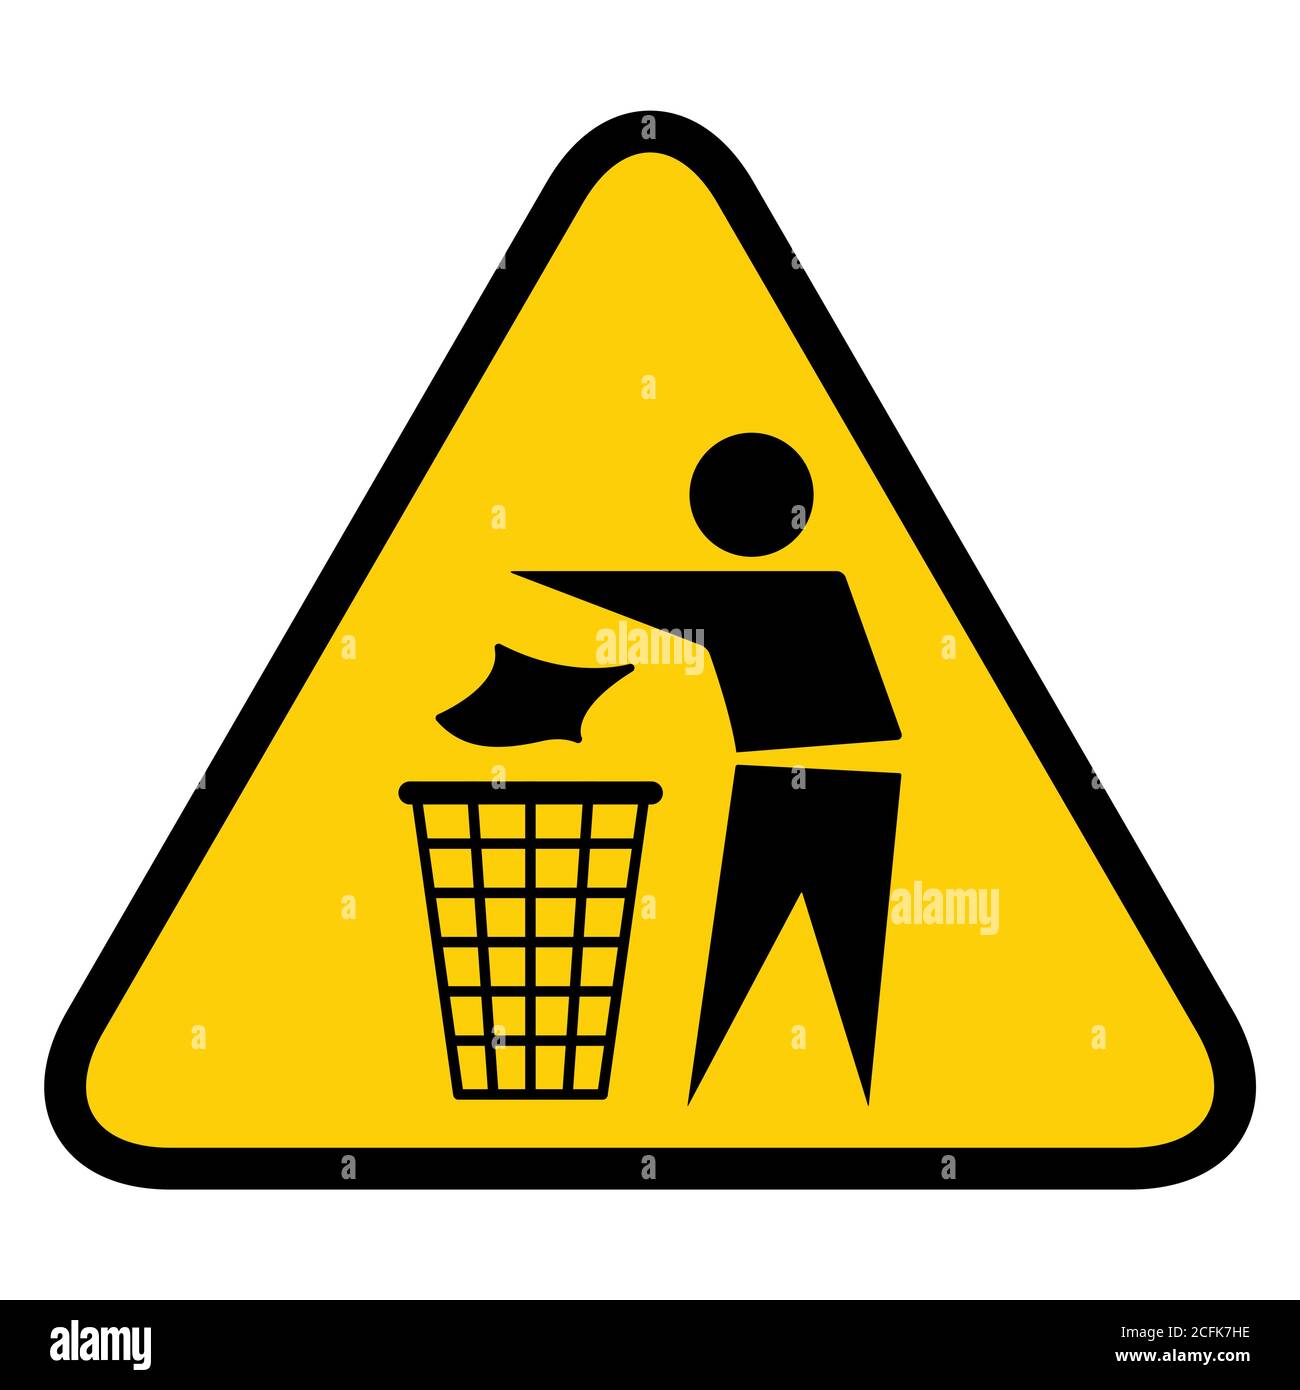 Do not litter flat icon in yellow triangle isolated on white background. Keep it clean vector illustration. Tidy symbol . Stock Vector